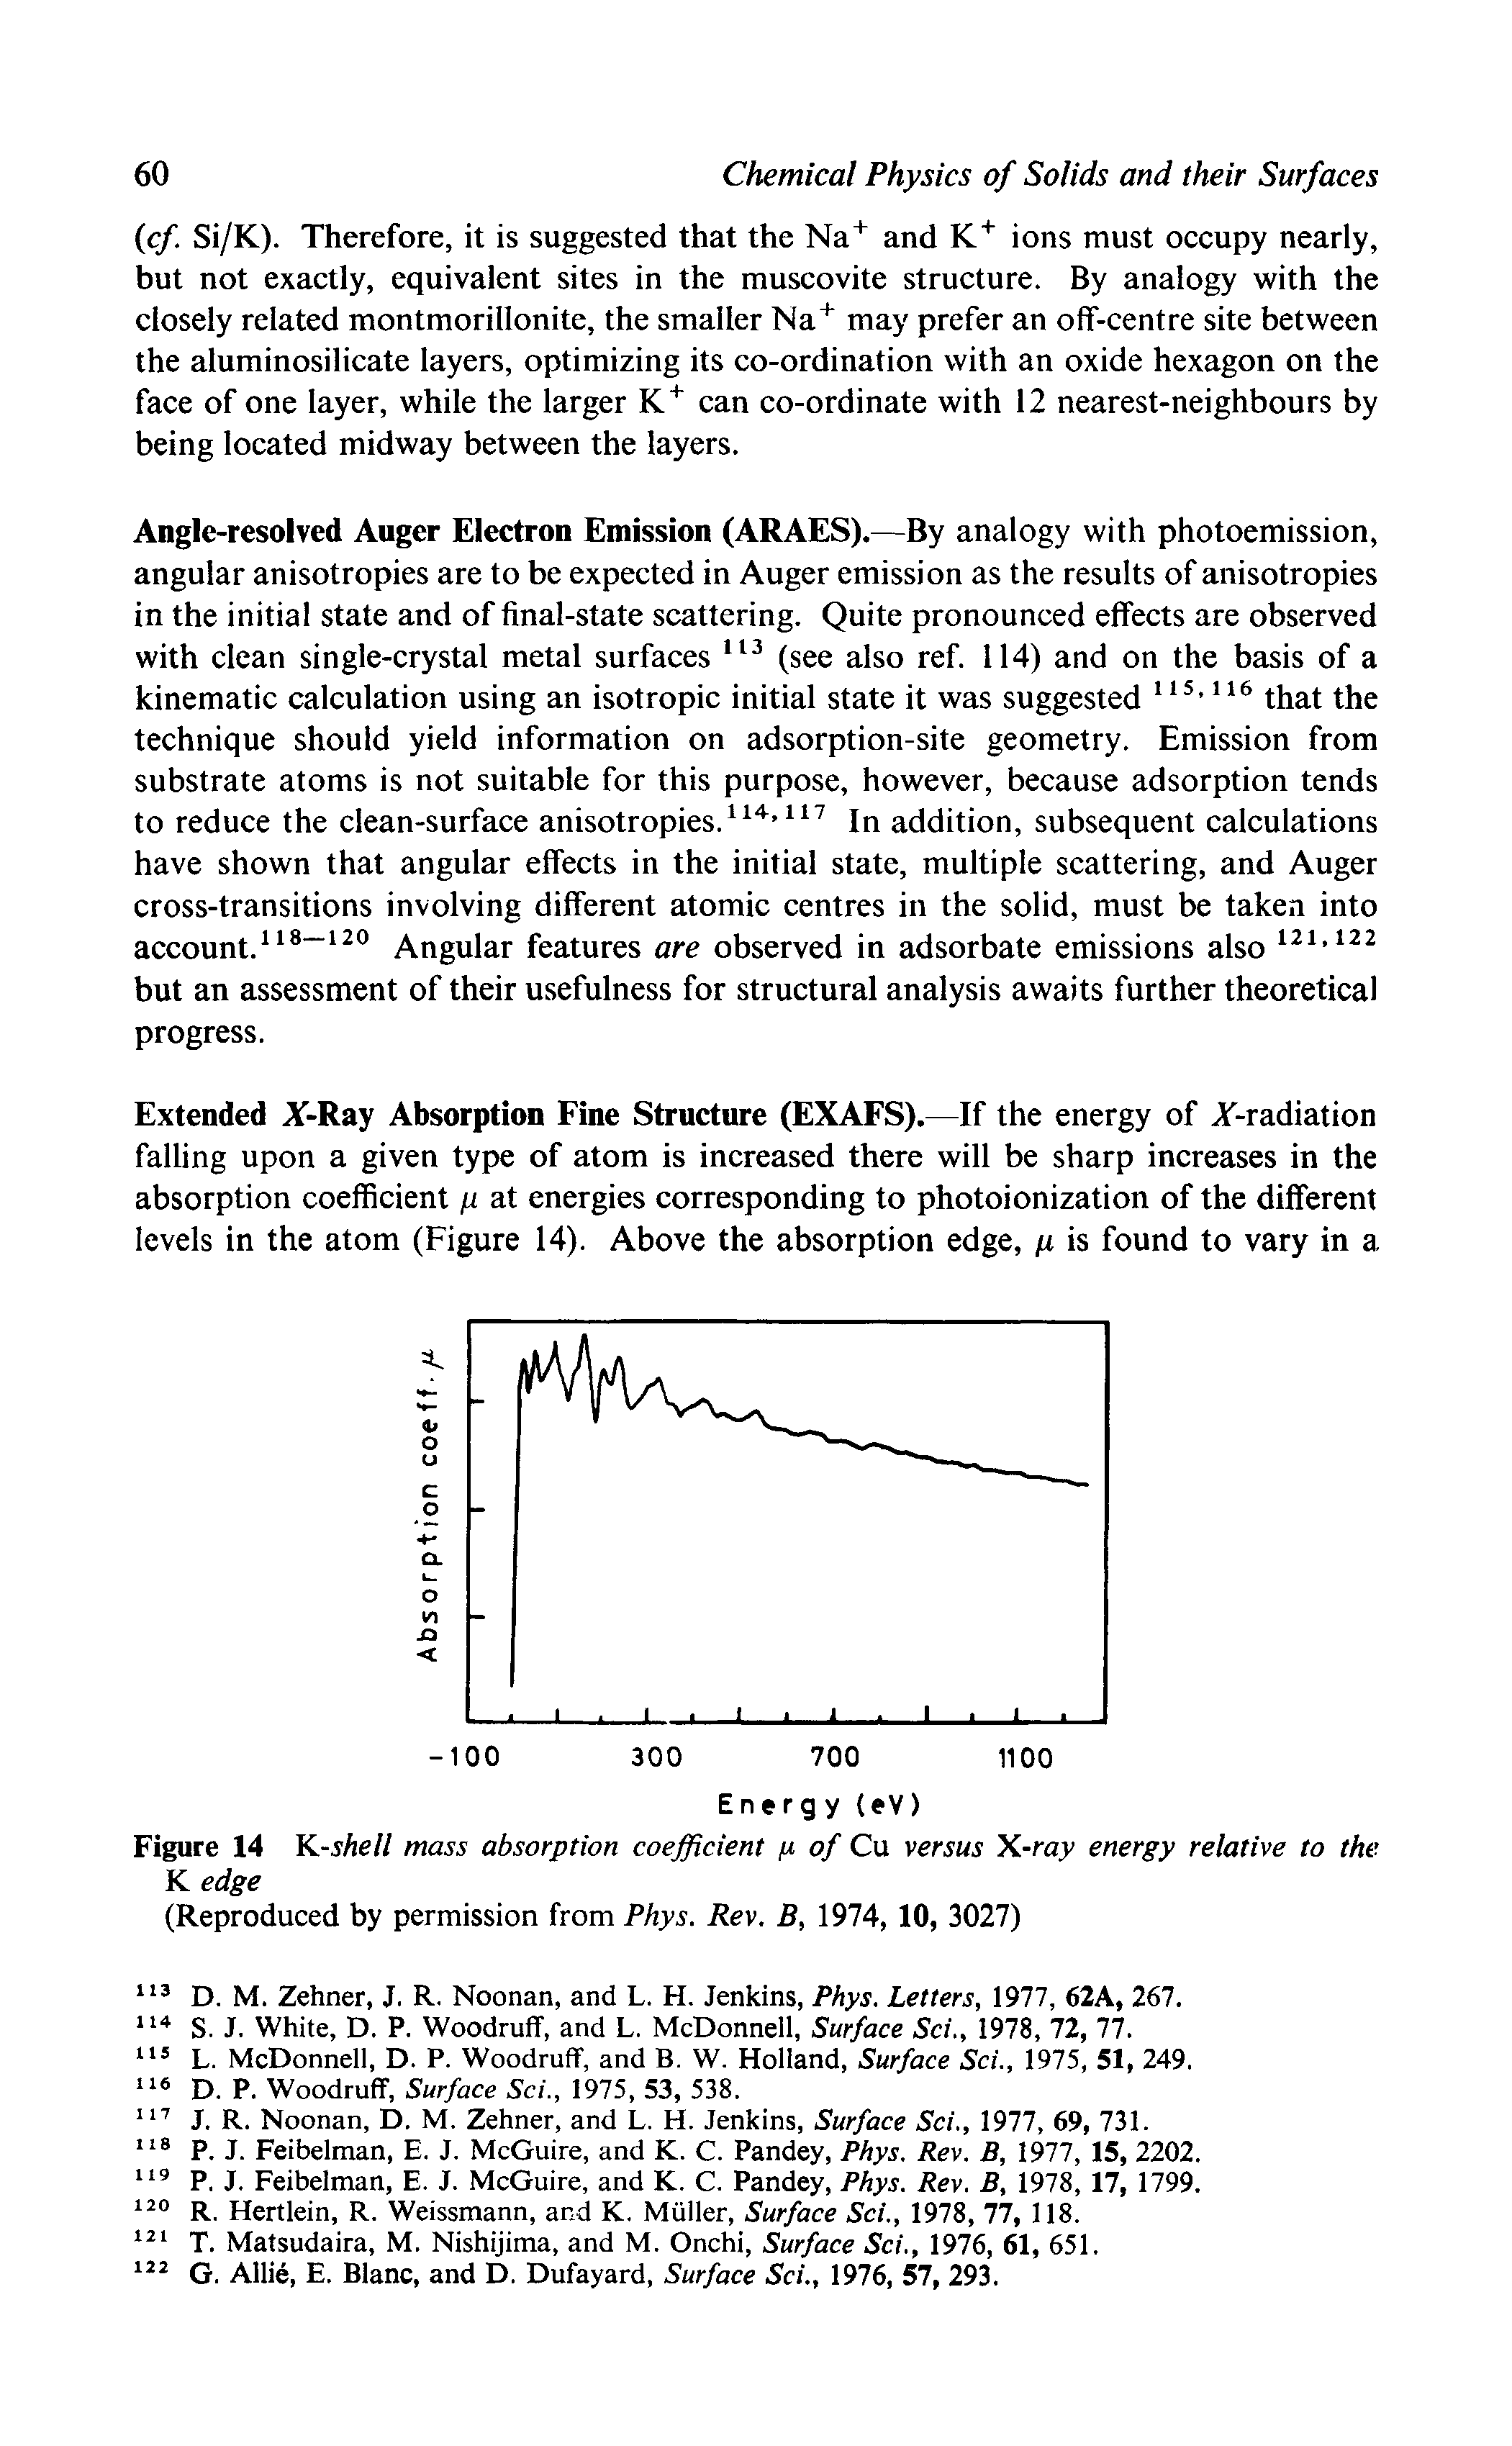 Figure 14 K-shell mass absorption coefficient /u of Cu versus X-ray energy relative to the K edge...